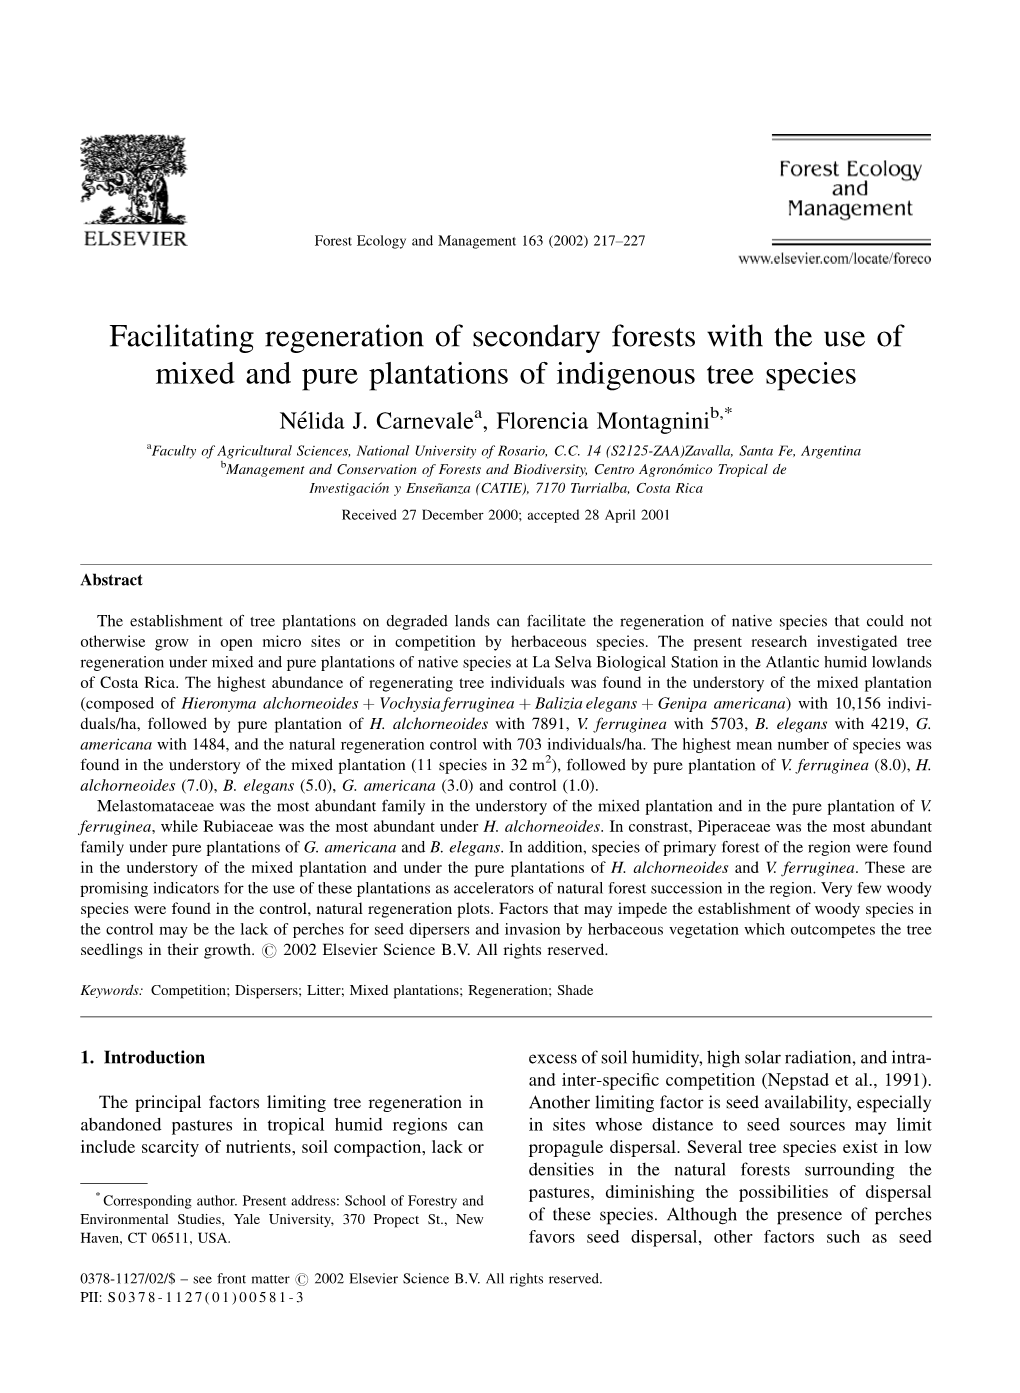 Facilitating Regeneration of Secondary Forests with the Use of Mixed and Pure Plantations of Indigenous Tree Species Neâlida J